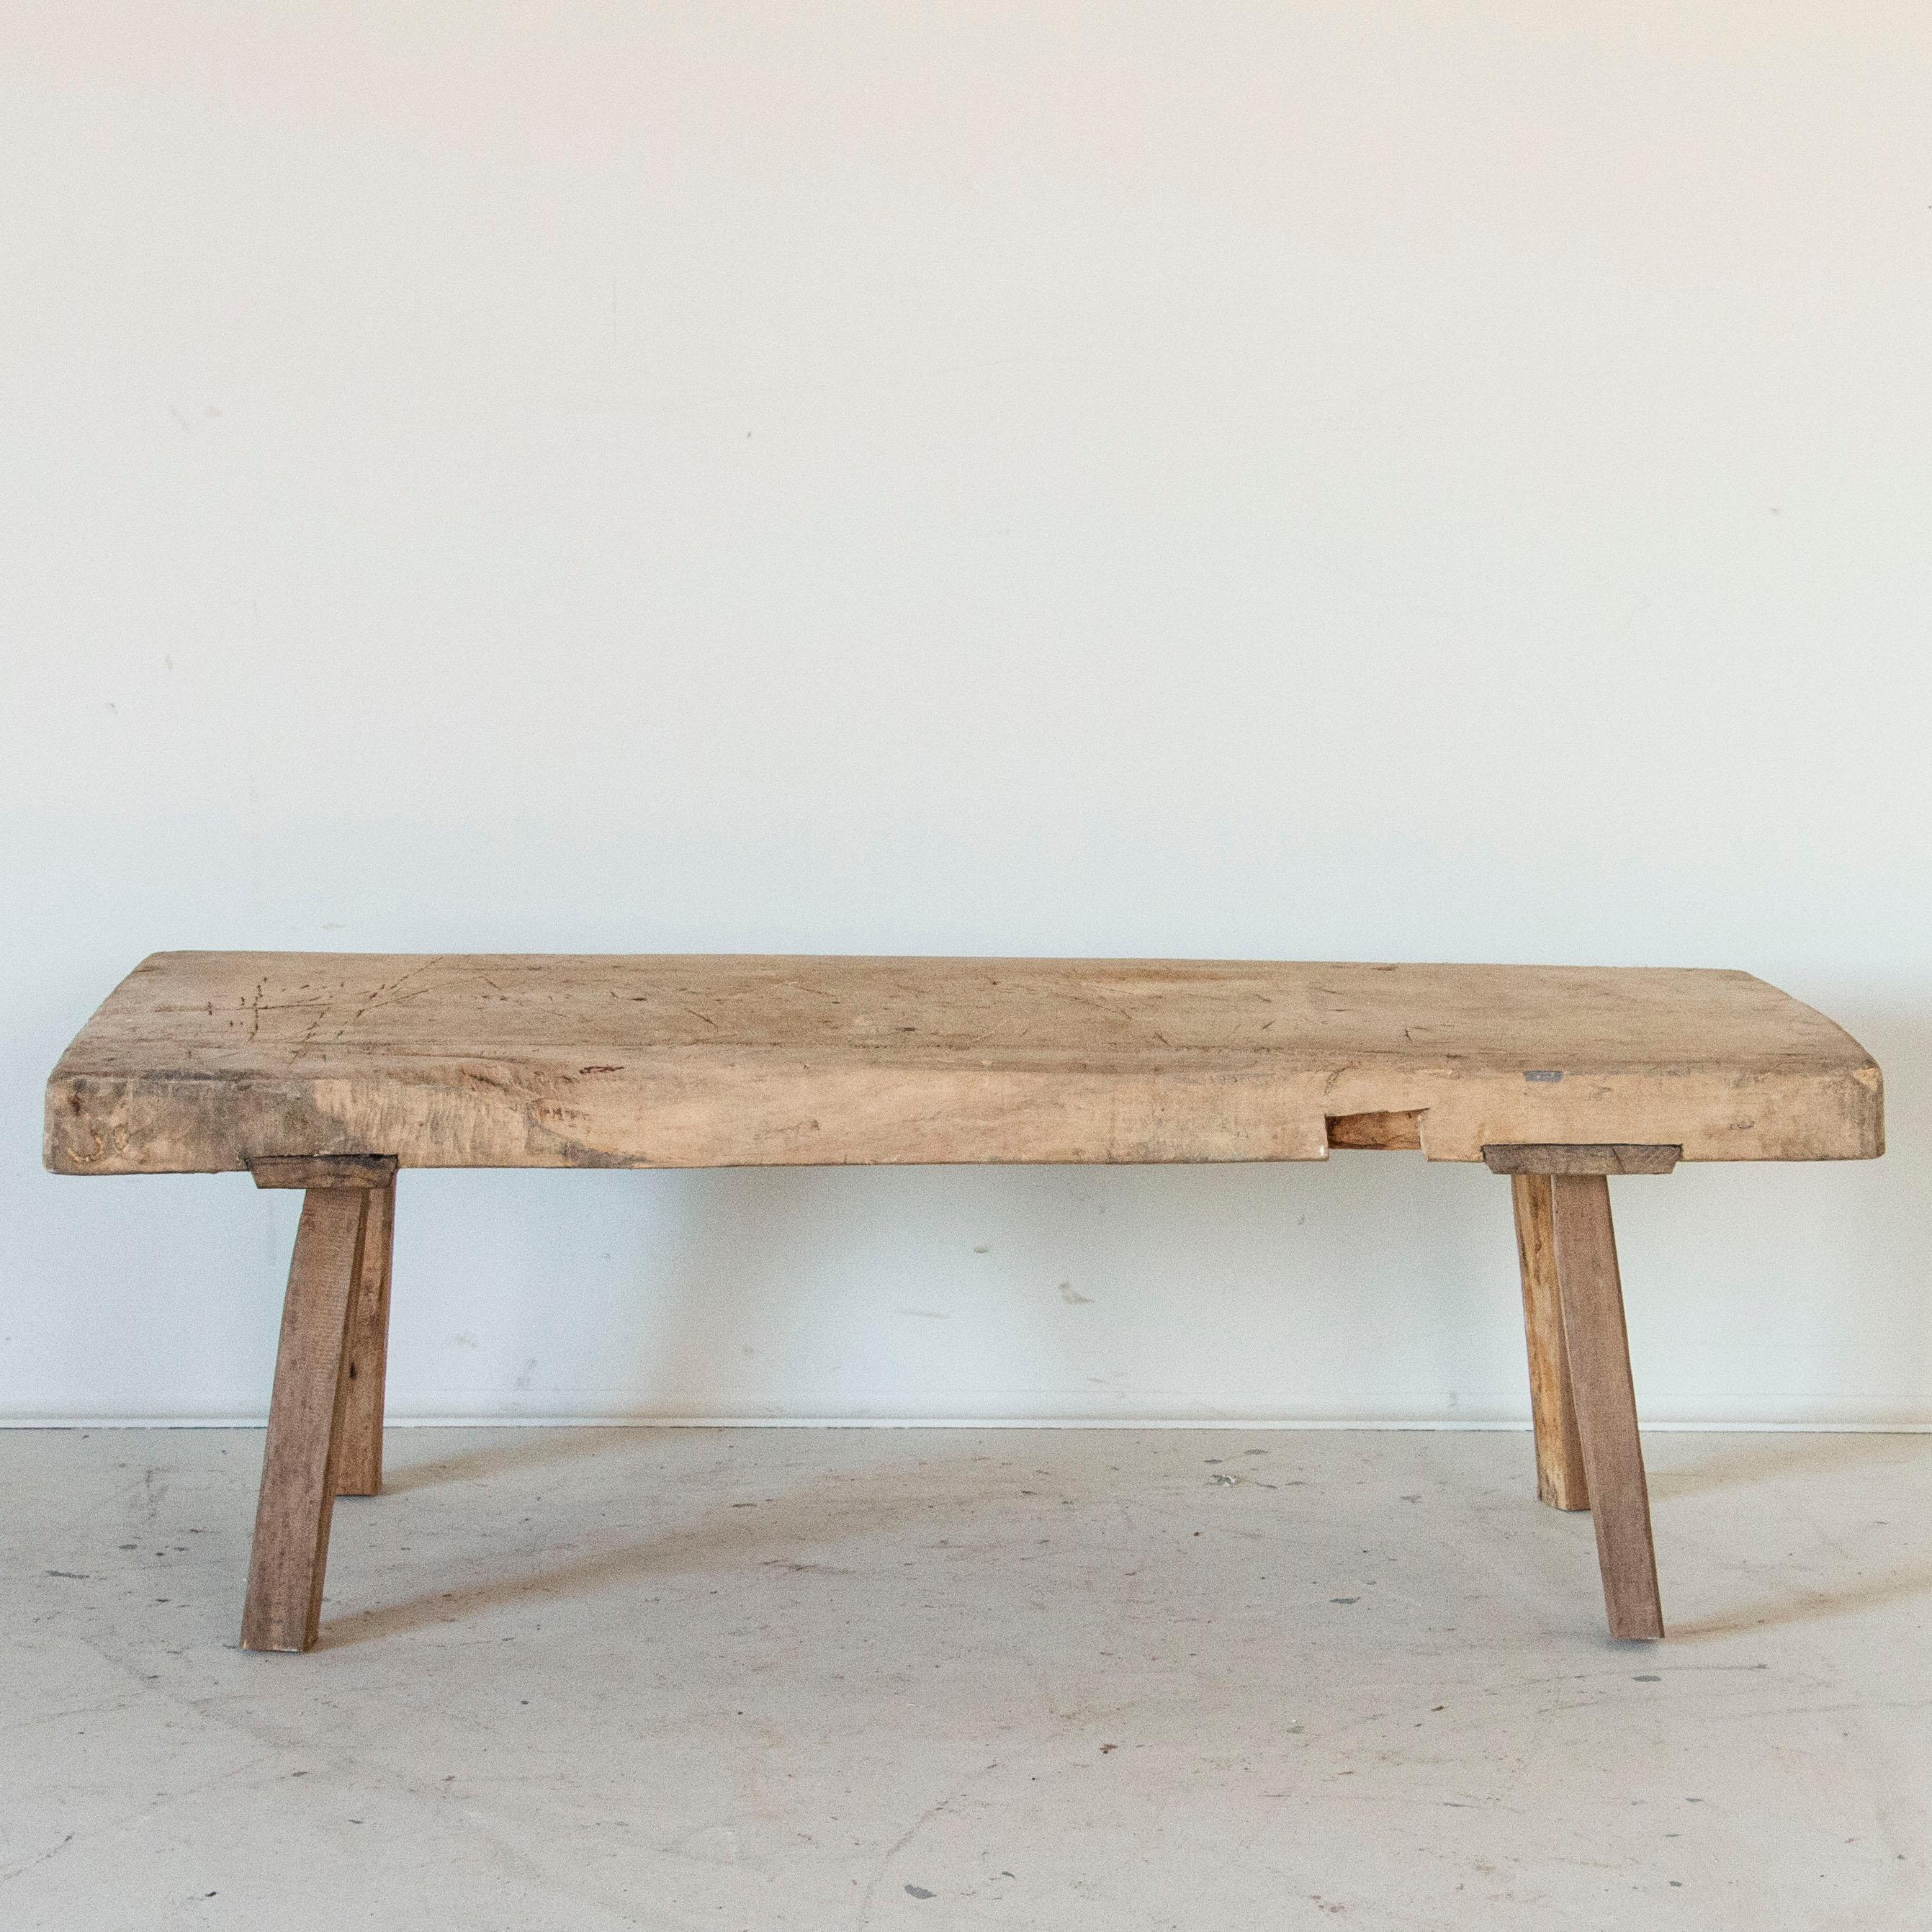 In person, you will be drawn to run your hand along the surface of this thick, slab wood topped coffee table. At almost 3